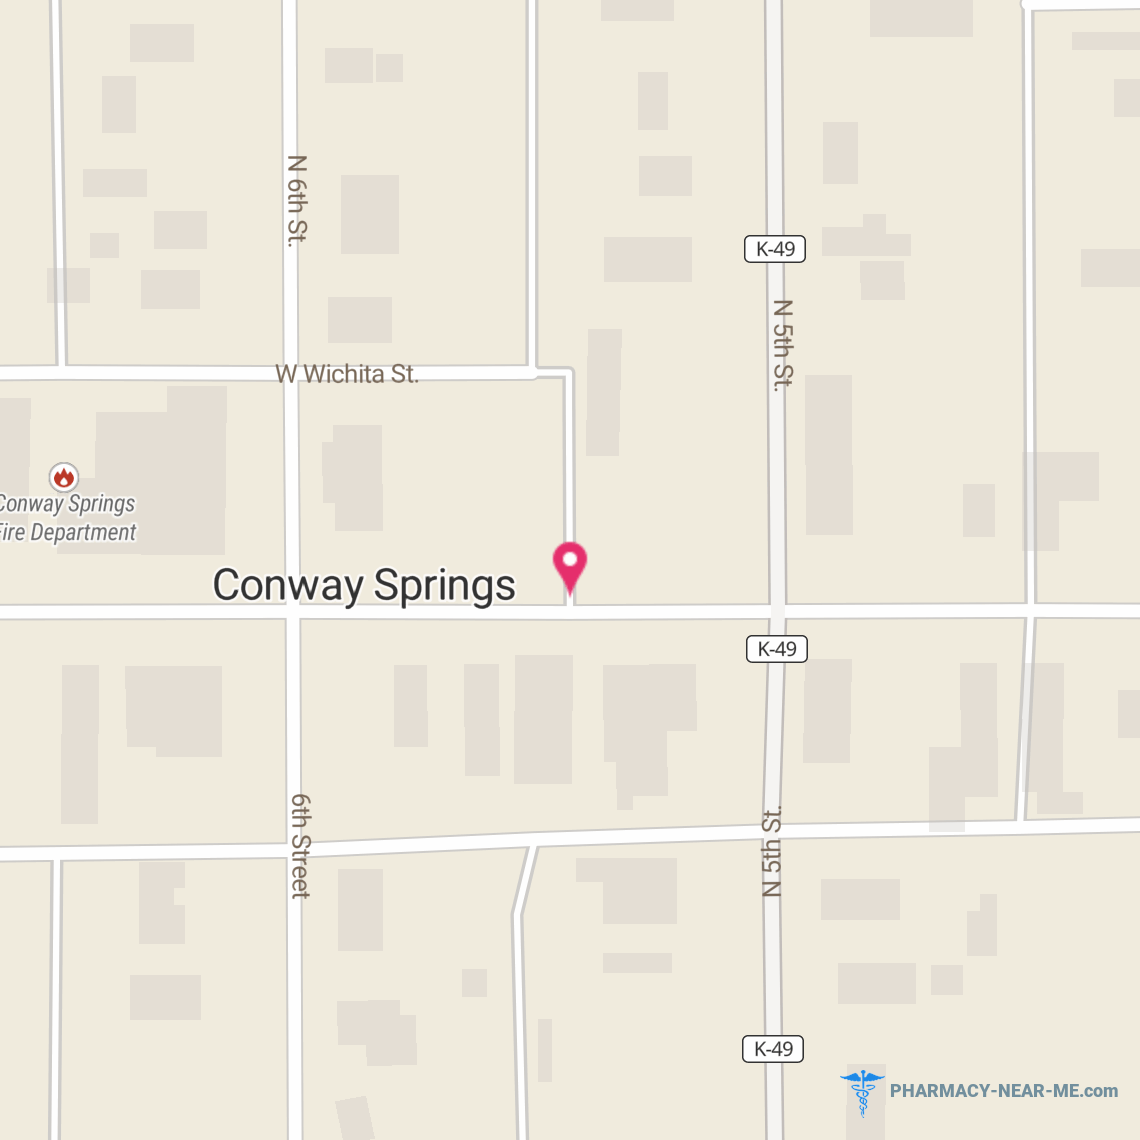 FREEMAN PHARMACY - Pharmacy Hours, Phone, Reviews & Information: 100 E Spring Ave, Conway Springs, Kansas 67031, United States